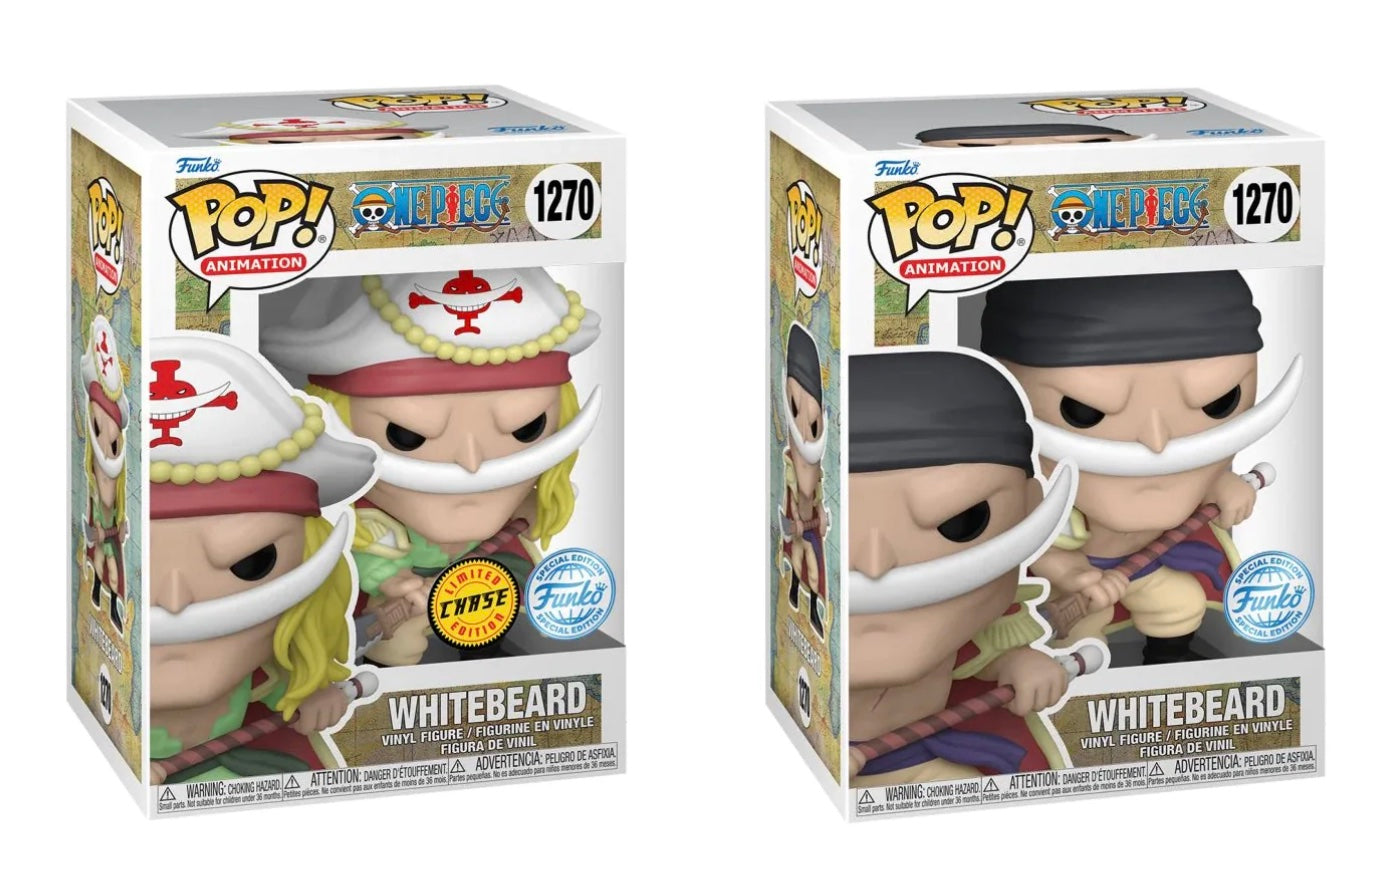 Animation One Piece - Whitebeard Chase + Common Guaranteed set Instock now Special Edition Exclusive